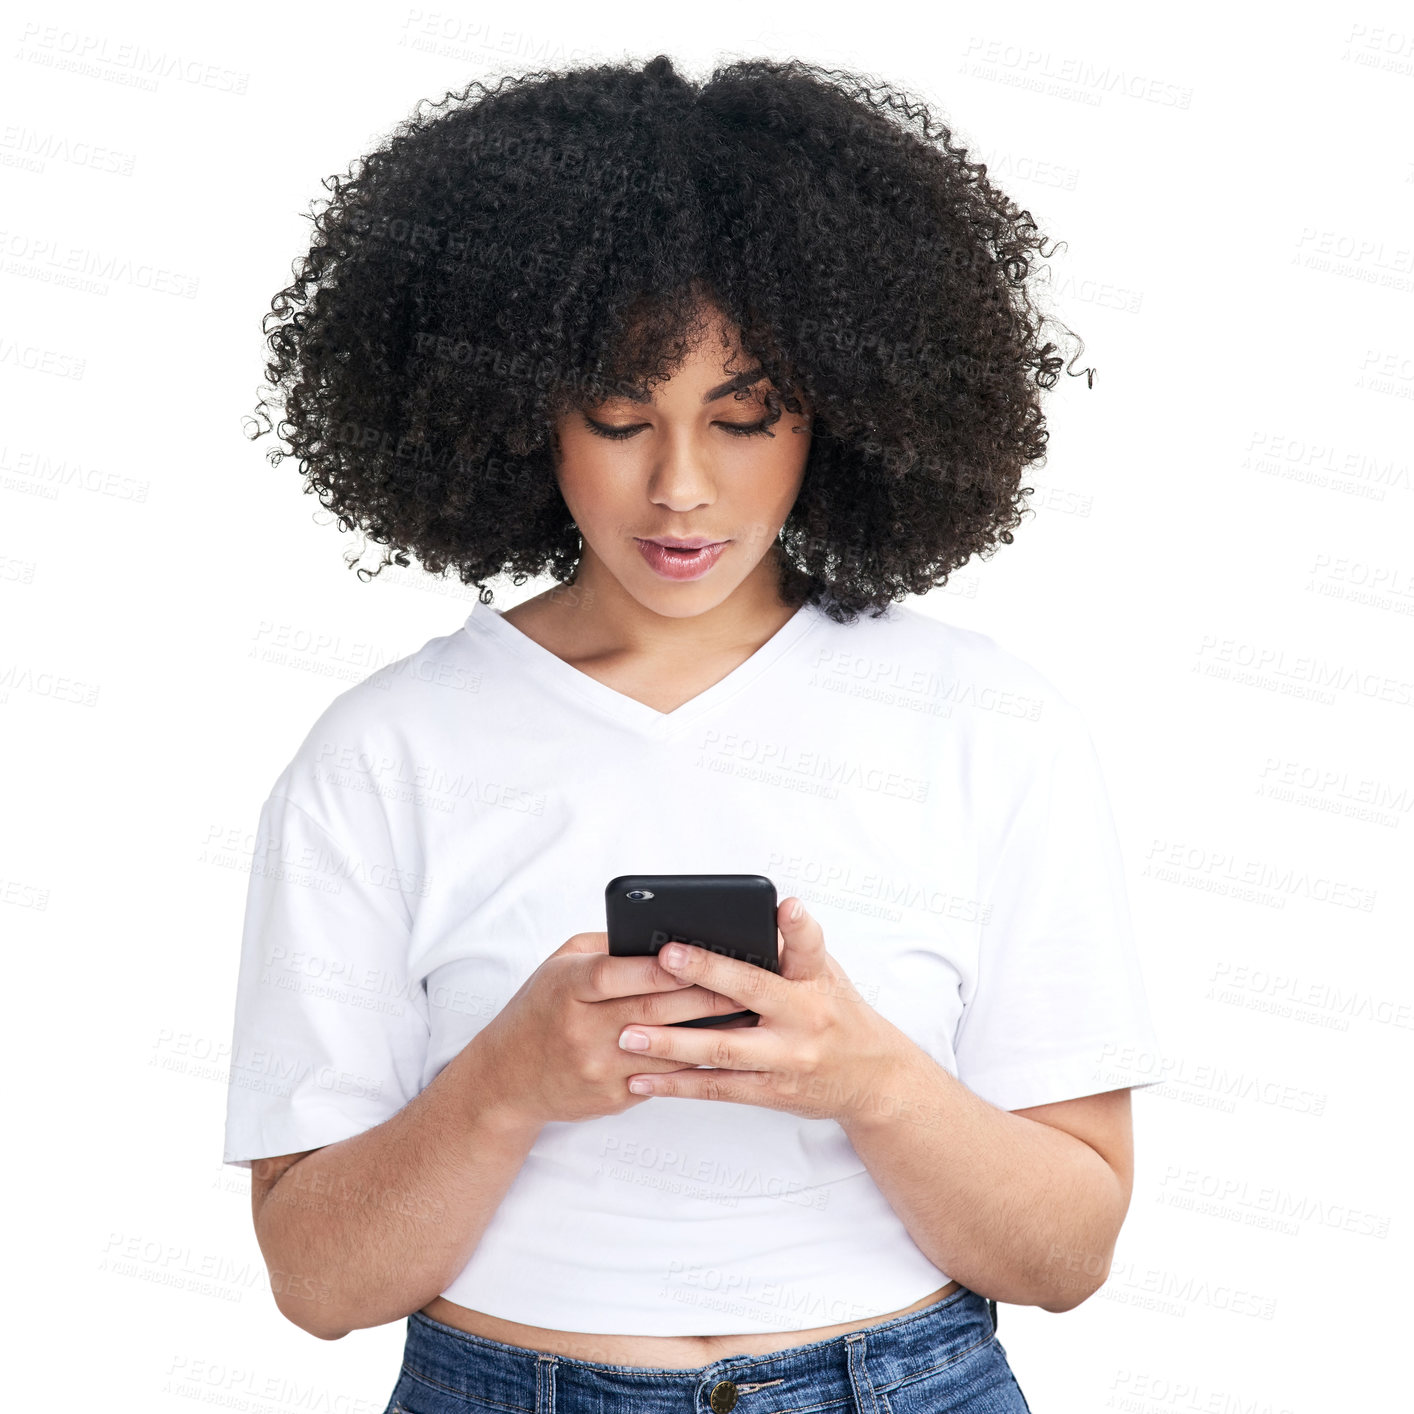 Buy stock photo Studio shot of an attractive young woman using a smartphone against a white background